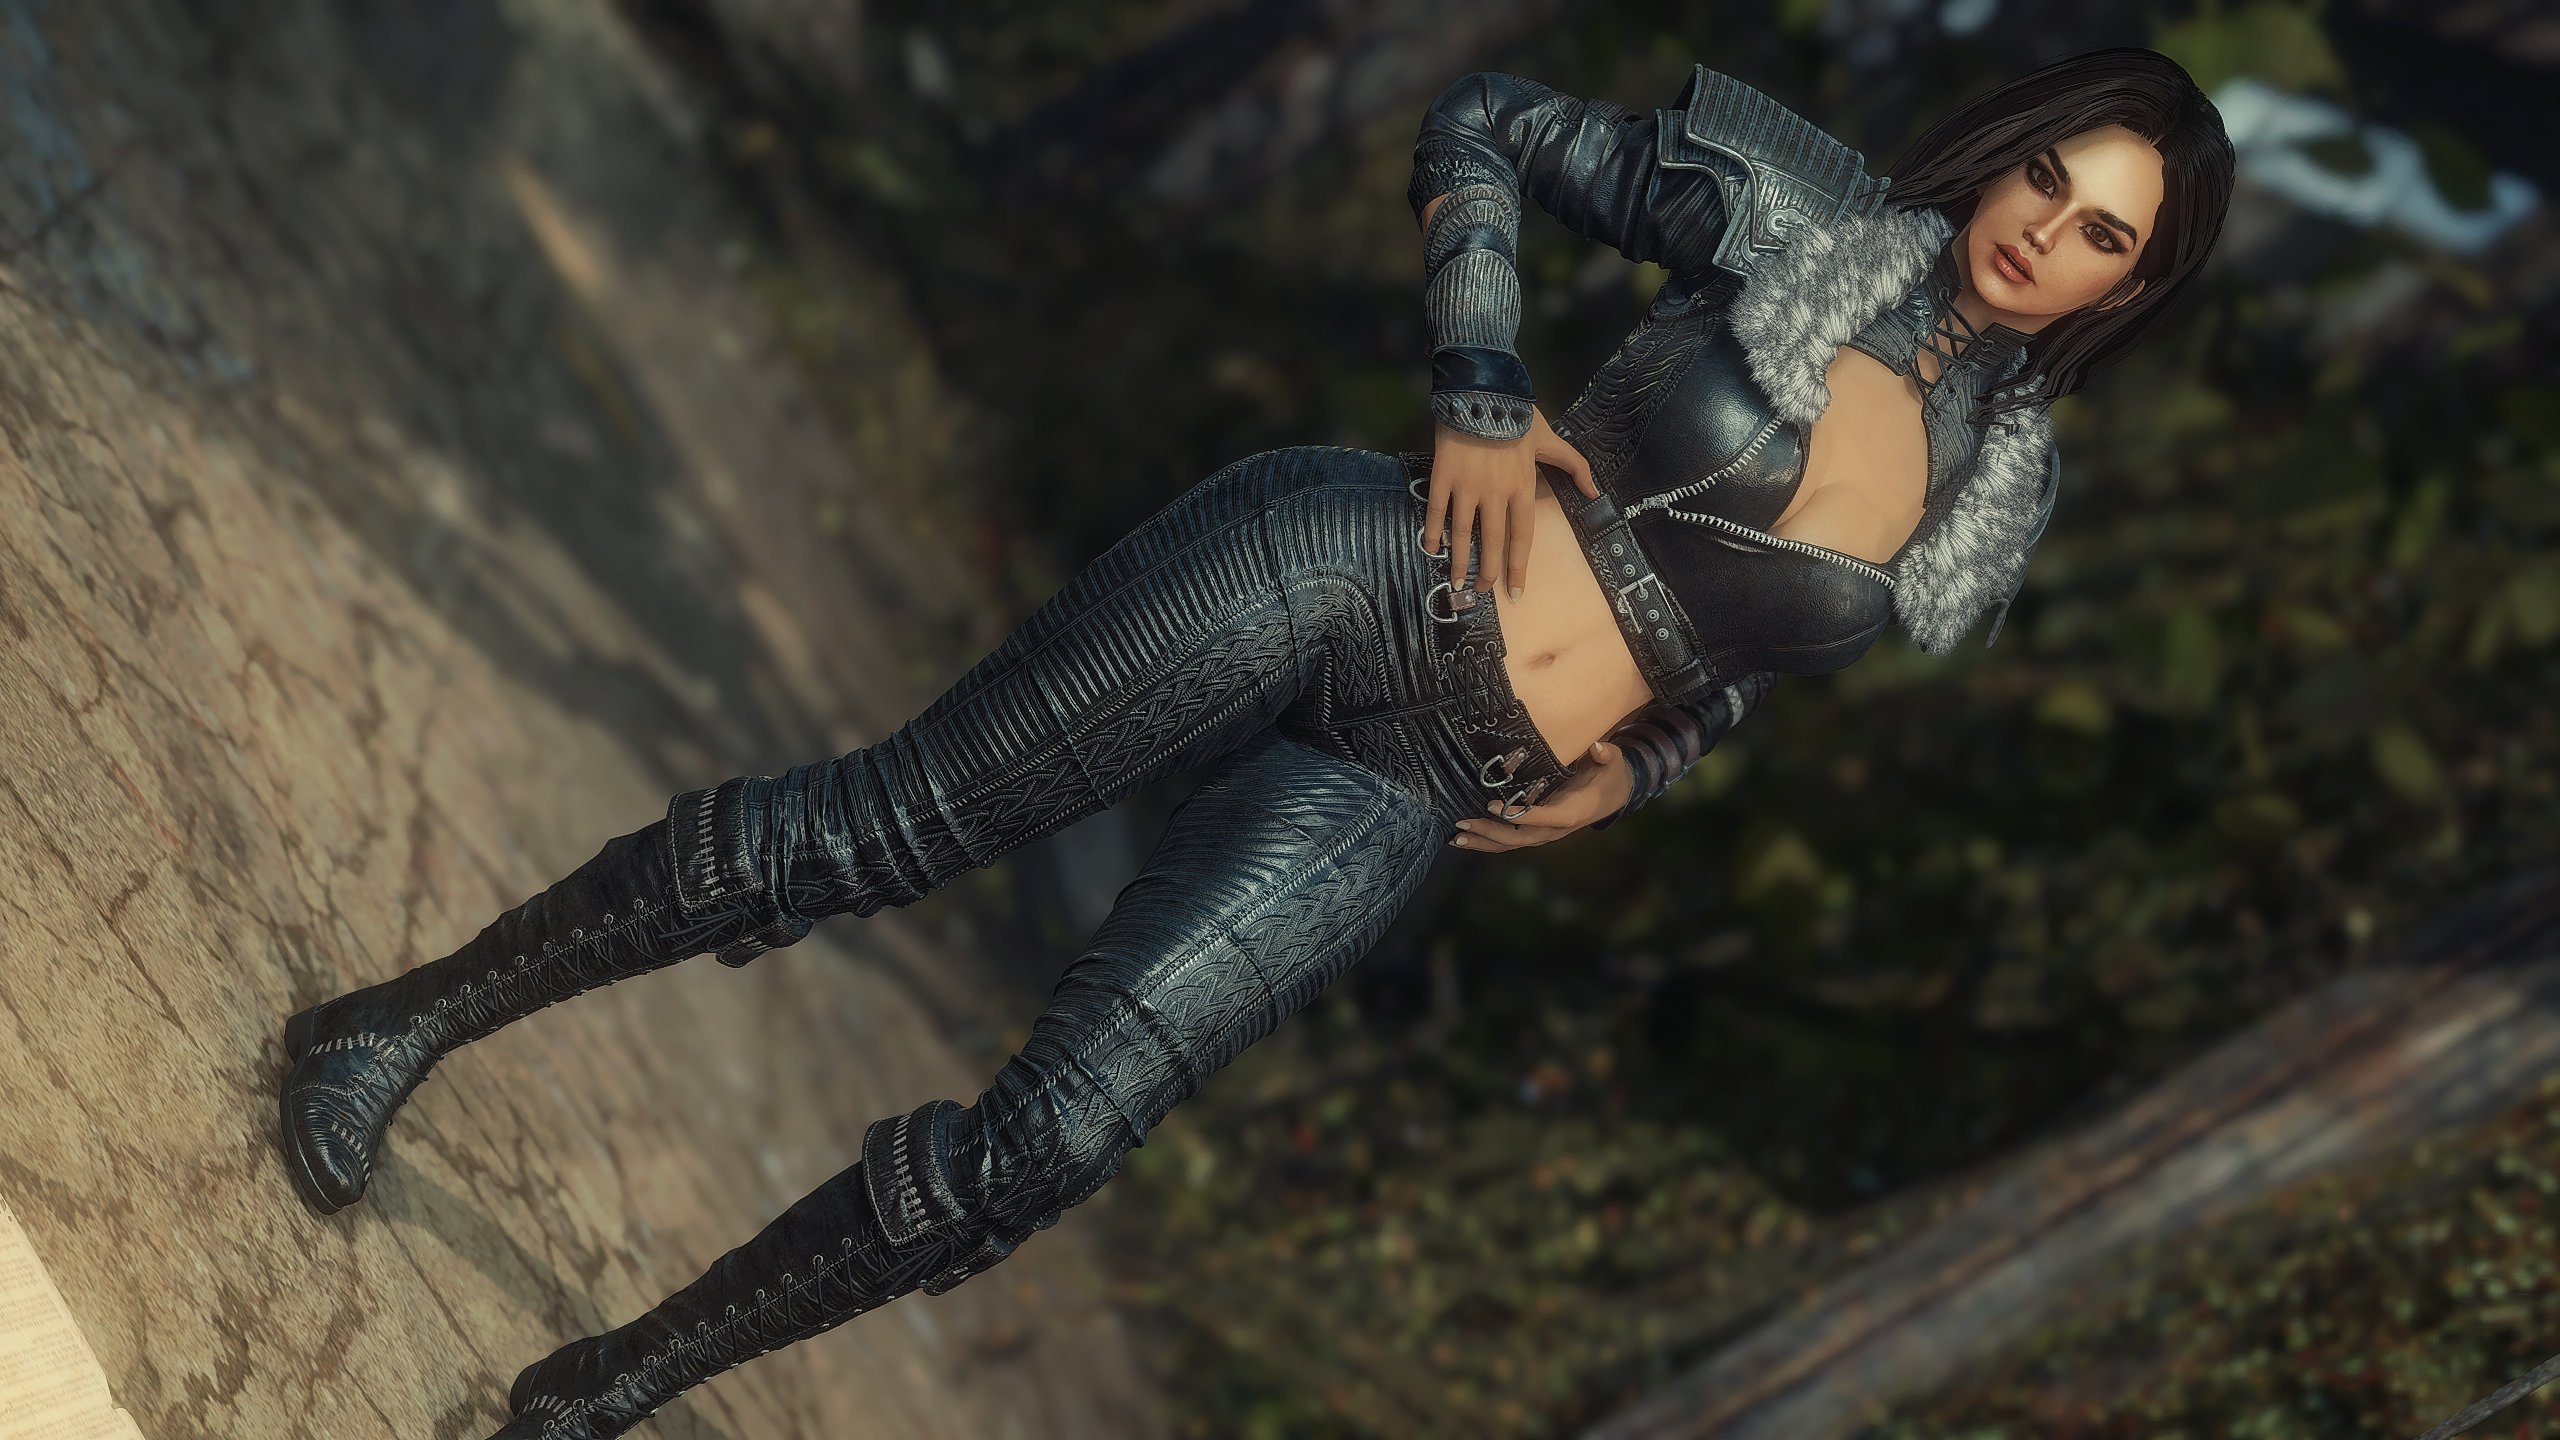 Vtaw Workshop Fallout 4 Clothing Armor Mods Fallout 4. www.loverslab.com. 